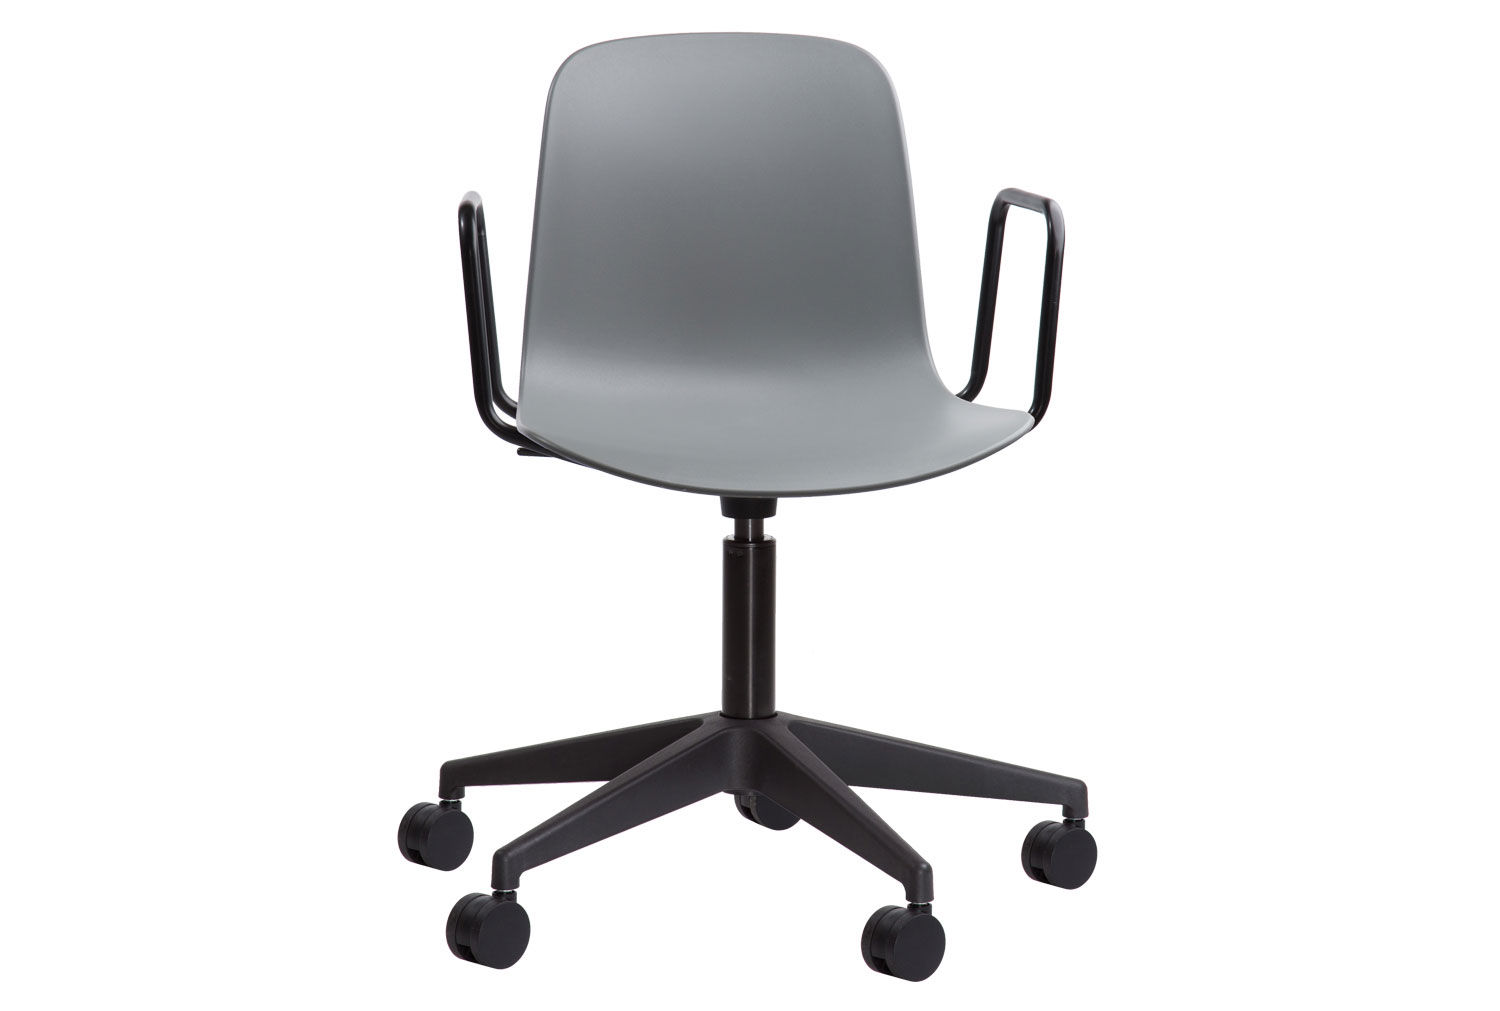 Qty 4 - Connors Task ArmOffice Chair, Coral Red